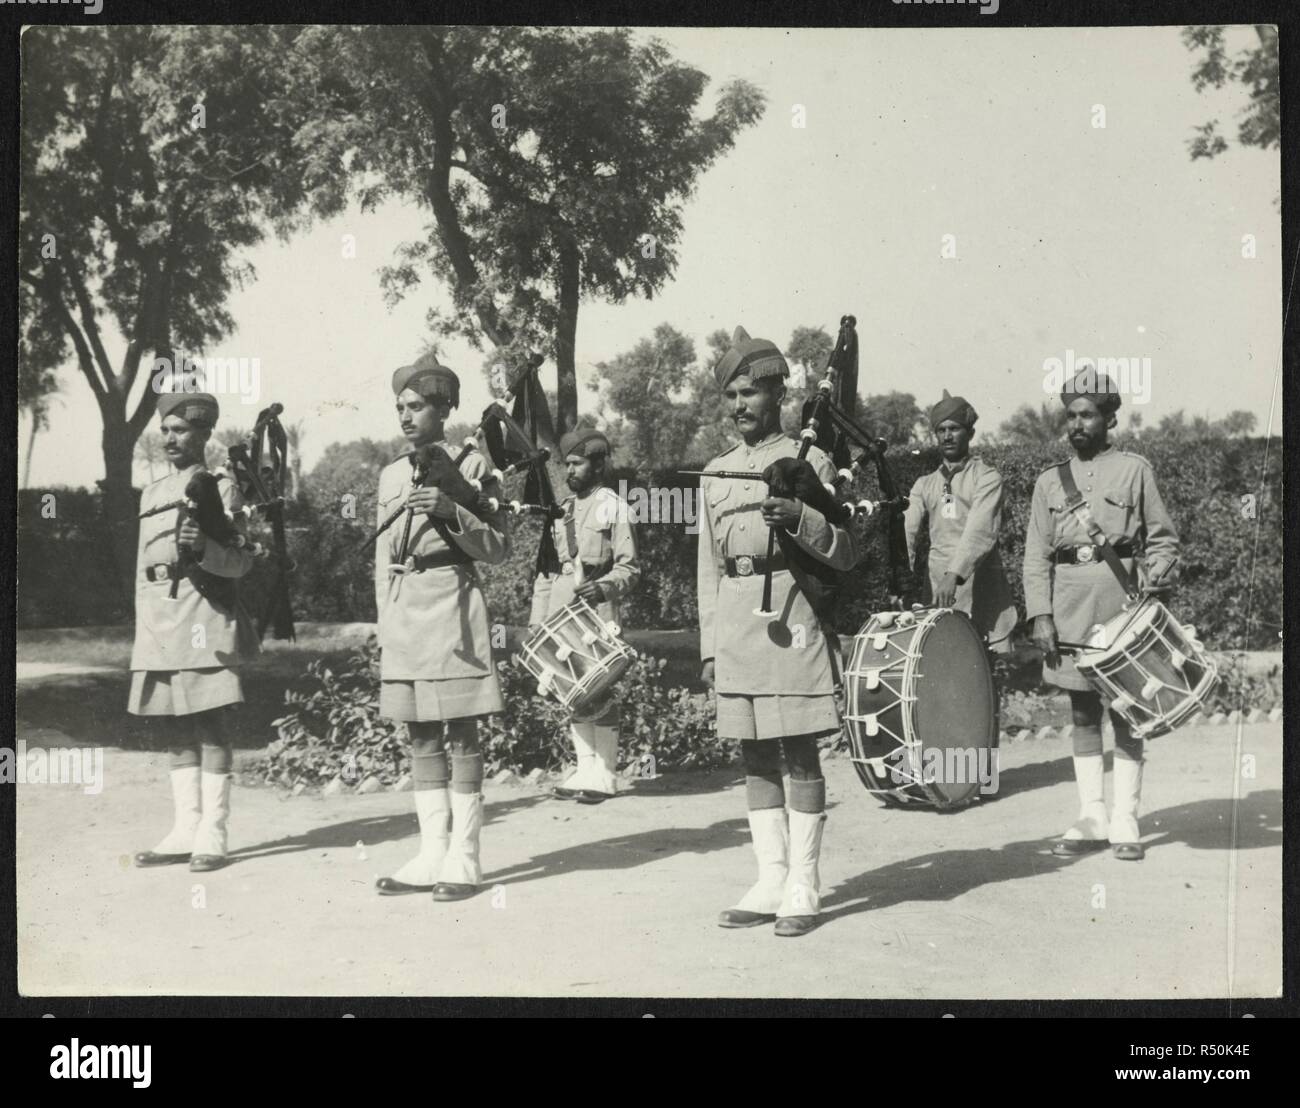 Amritsar Police Band(?). Portraits of Indian police Groups. c. 1930s. Source: Photo 348/(21). Author: UNKNOWN. Stock Photo